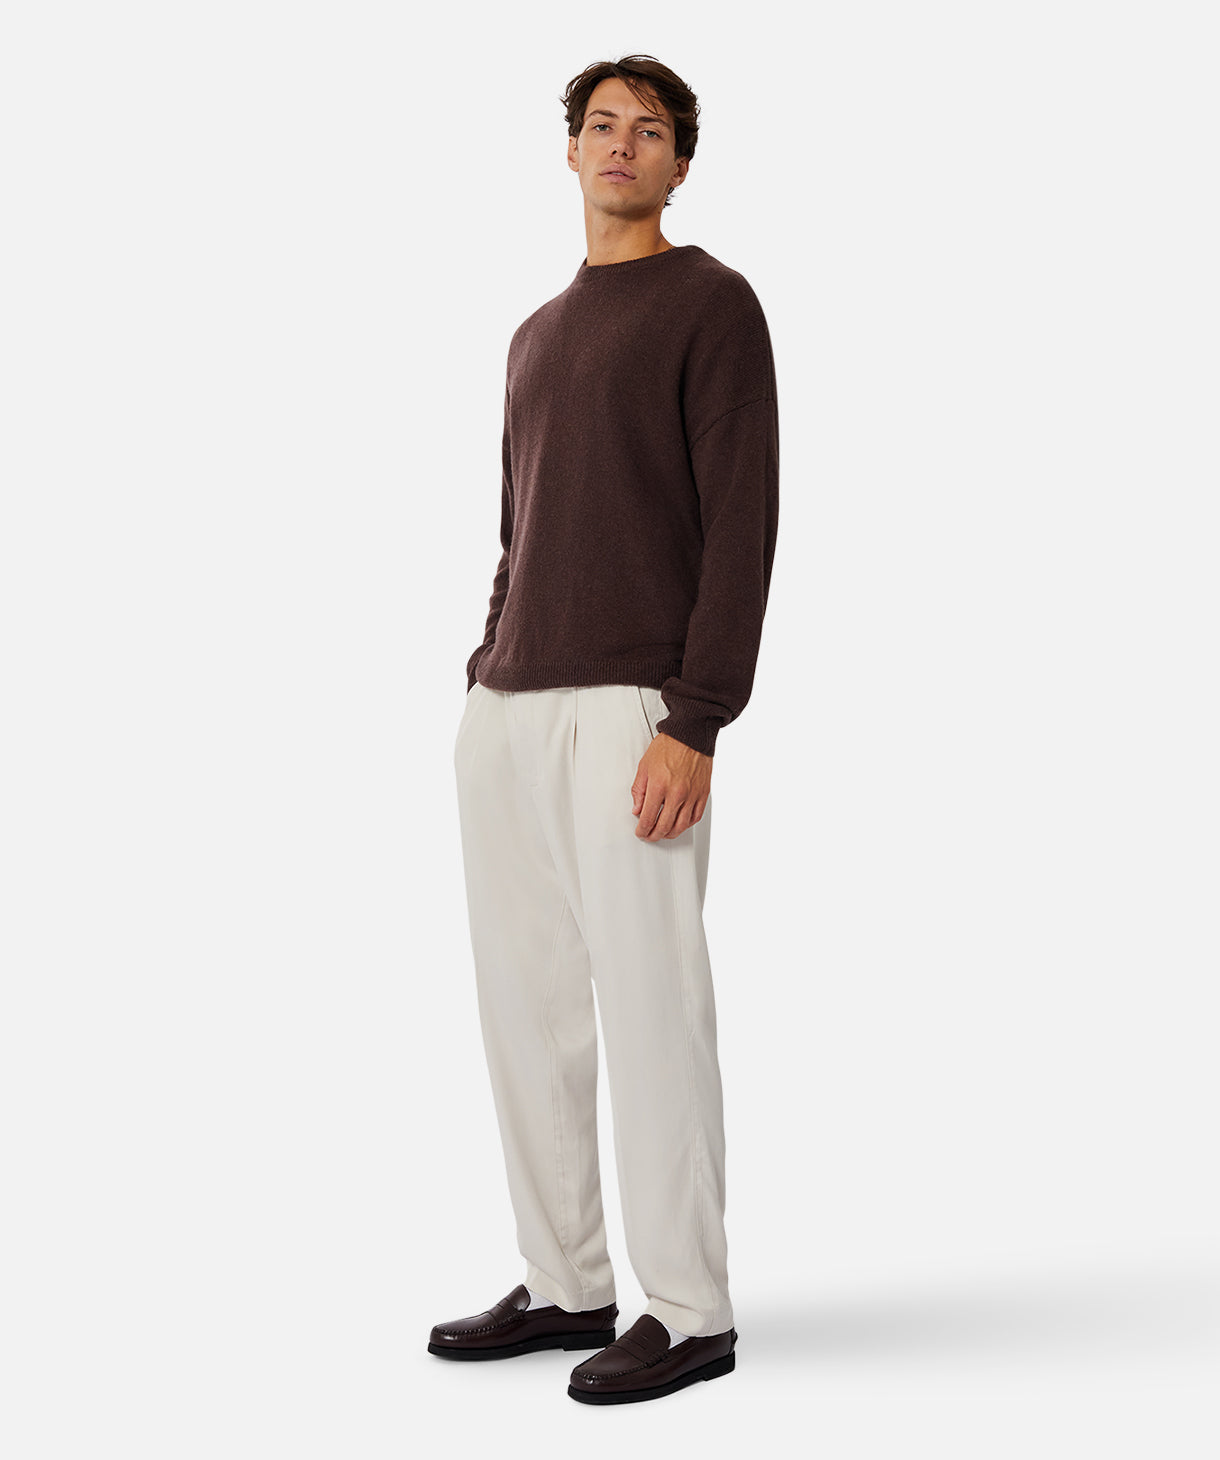 Shop The Stoningston Knit in Port | Industrie Clothing – Industrie ...